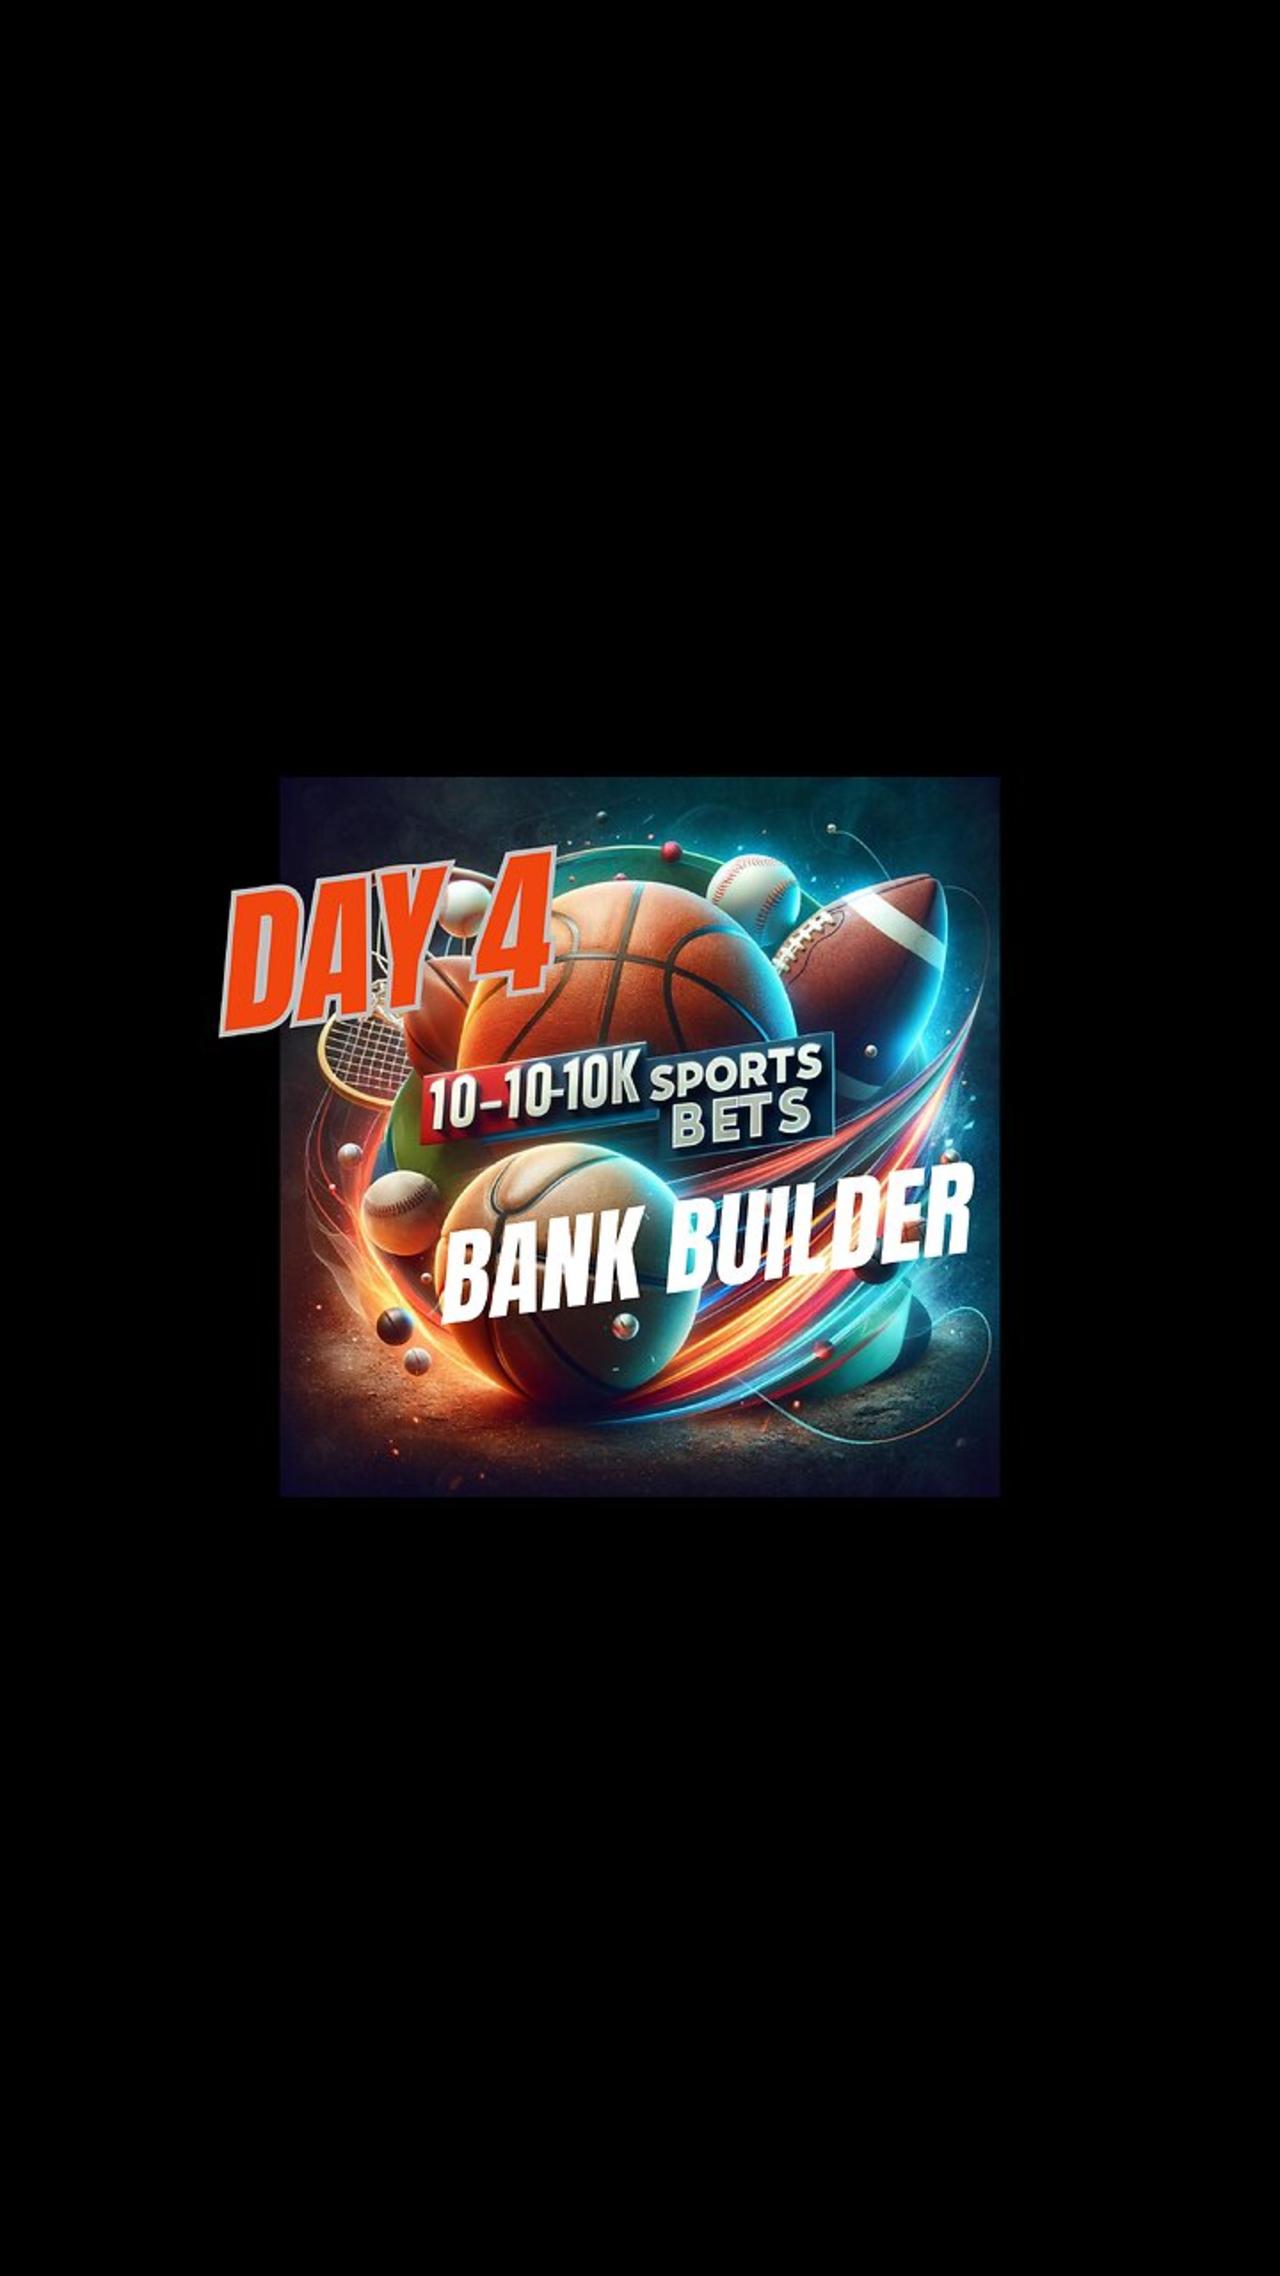 "Winning Big on Day 3: The $50 to $1k Bank Builder Continues on to Day 4!"